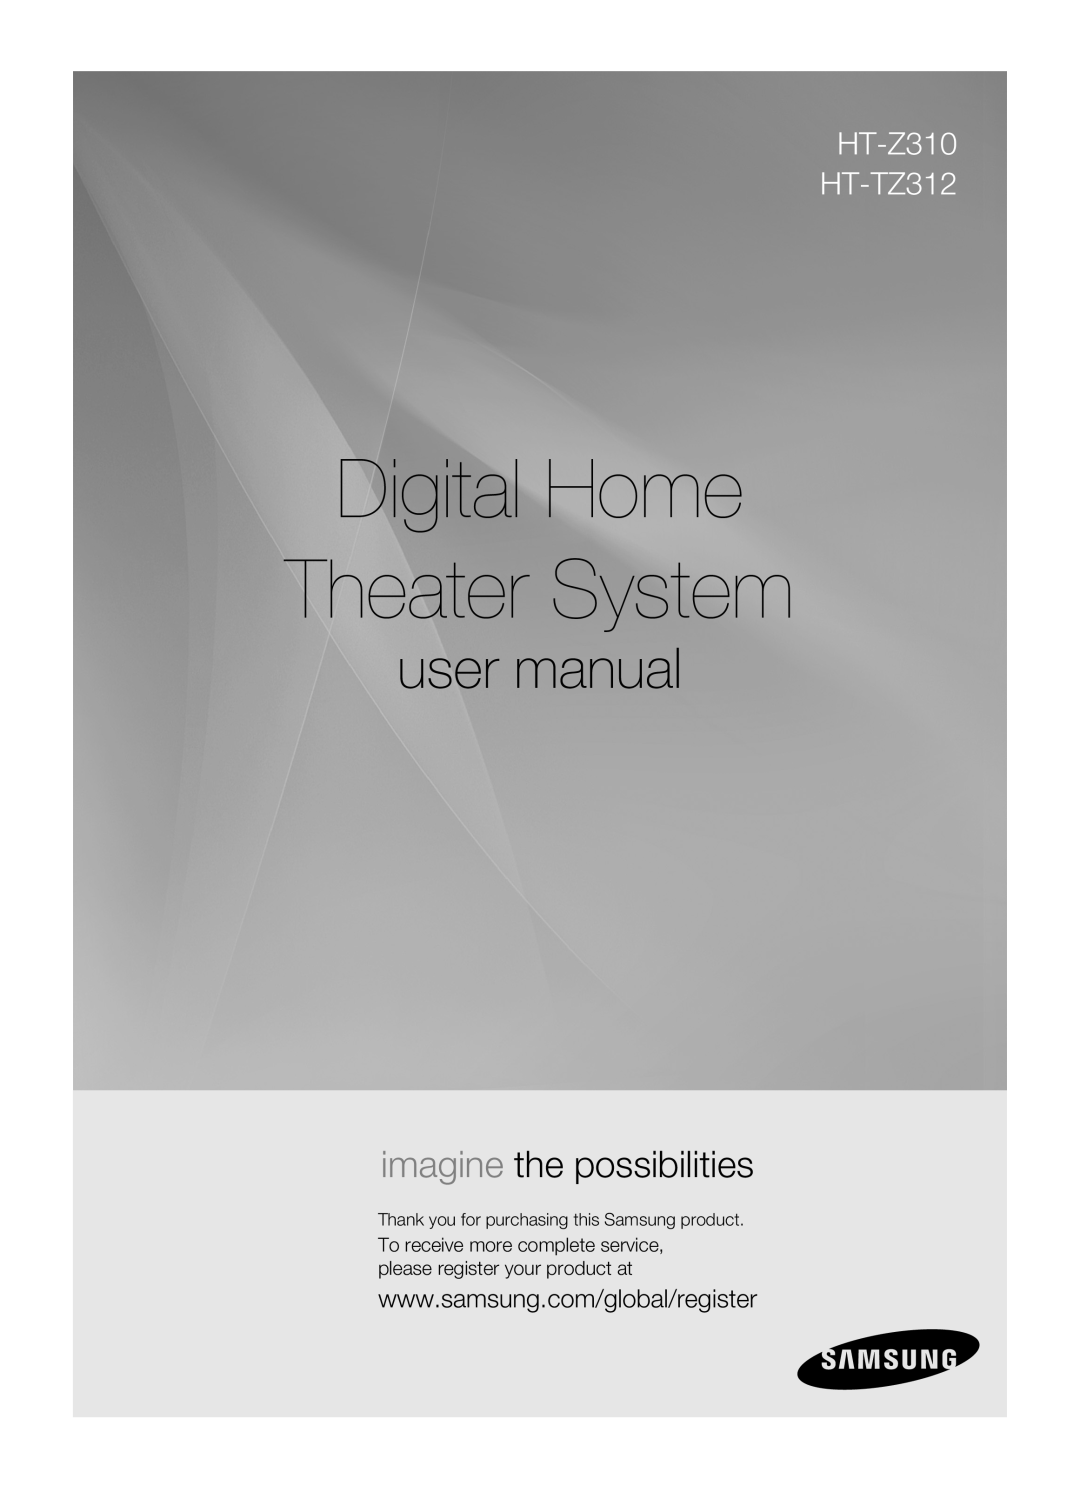 Samsung AH68-02055S Digital Home Theater System, user manual, imagine the possibilities, HT-Z310 HT-TZ312 